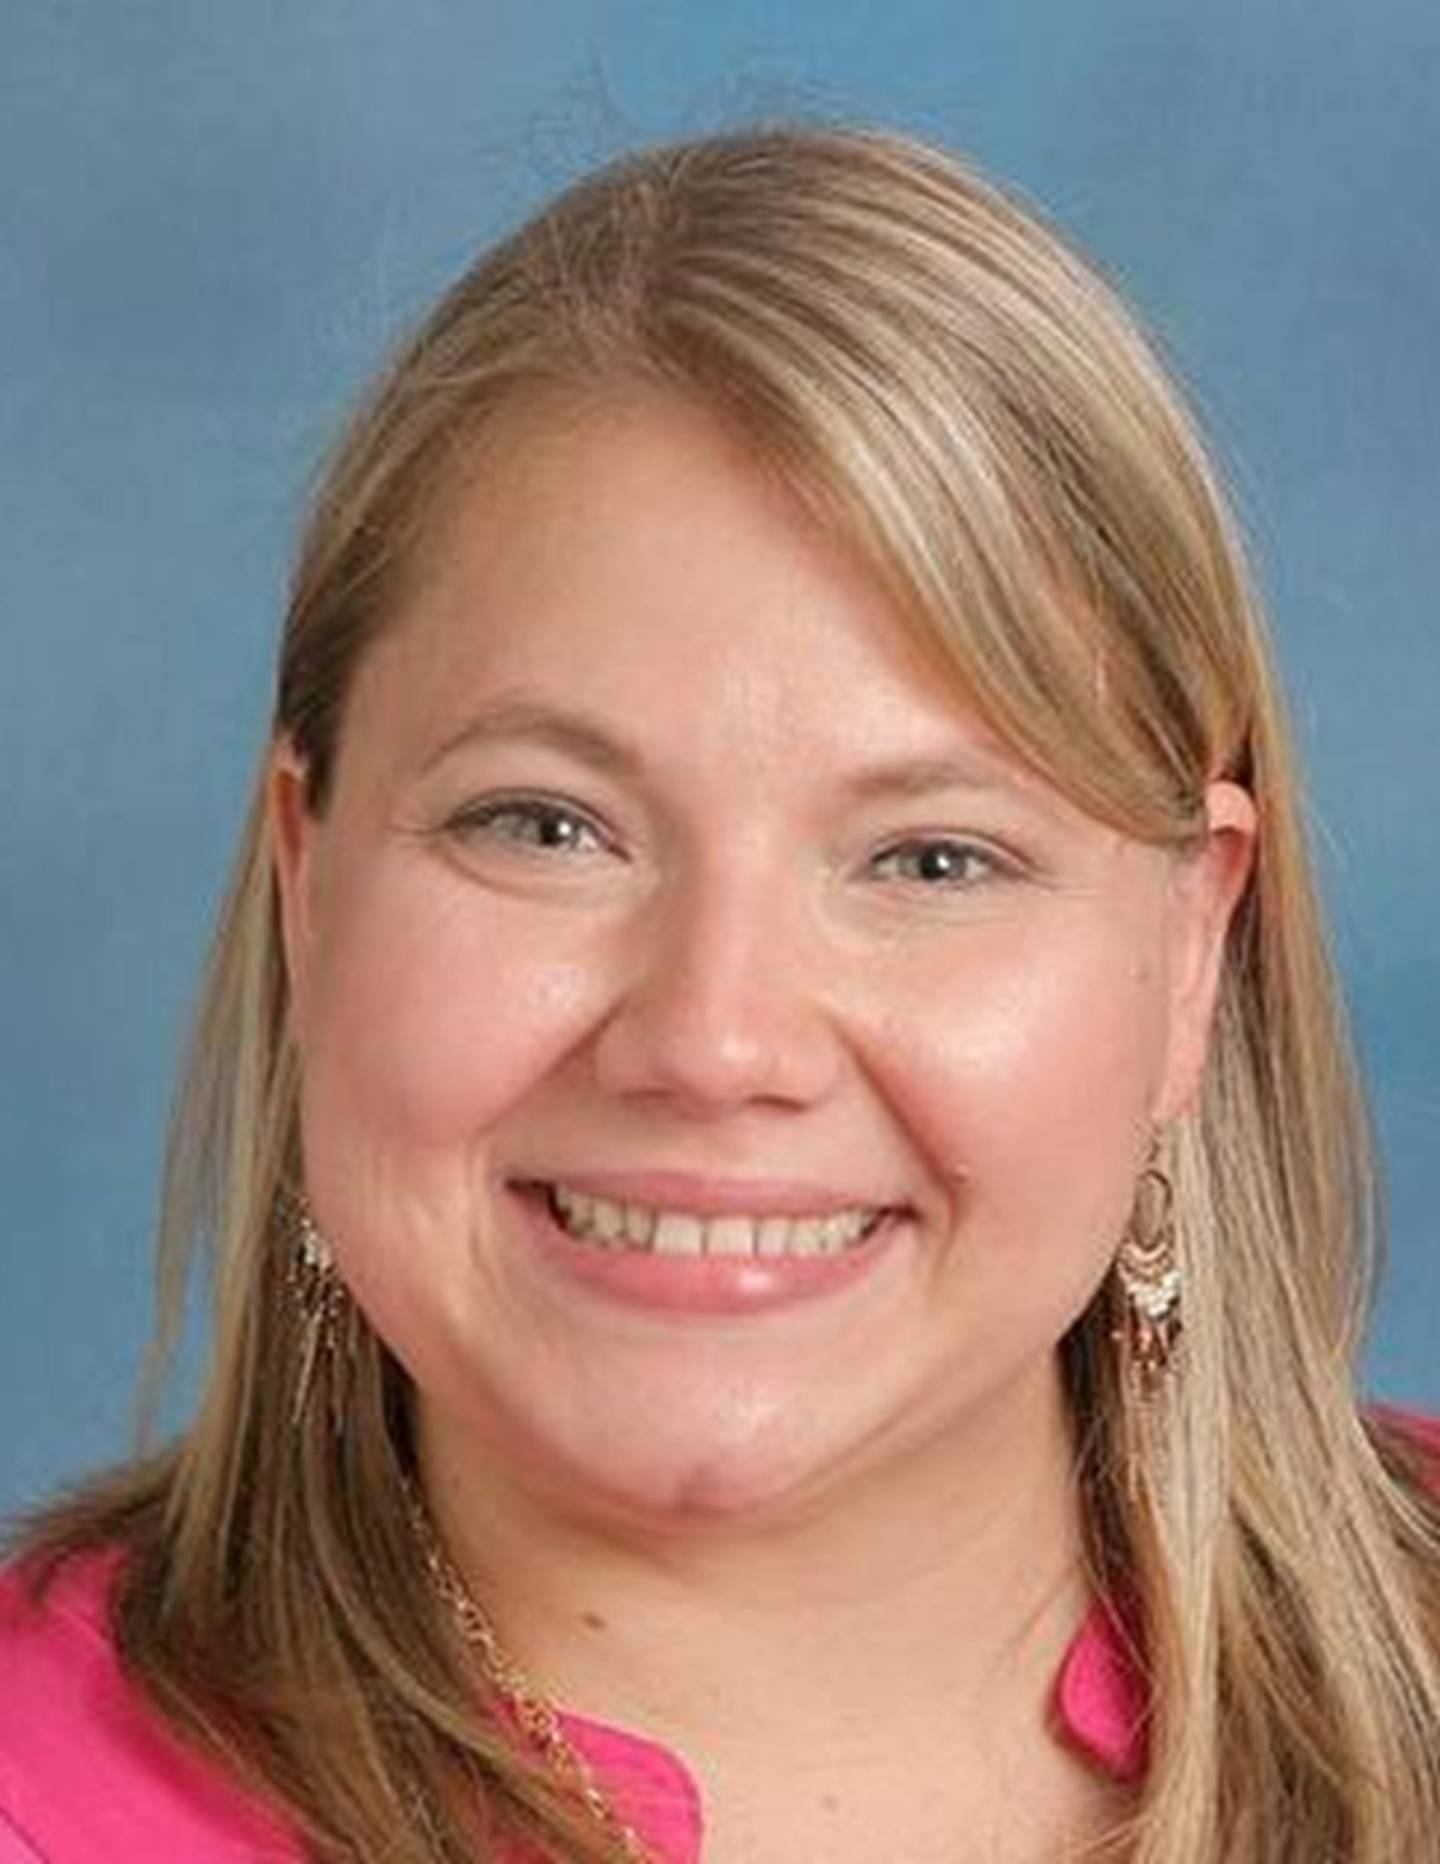 Jennifer Szynal teaches in the fine arts program at Joliet Catholic Academy and is one of three JCA teachers accepted into Microsoft Innovative Educator Experts program and one of 27 Illinois educators who are a part of the global MIEE program for the 2021-2022 school year.